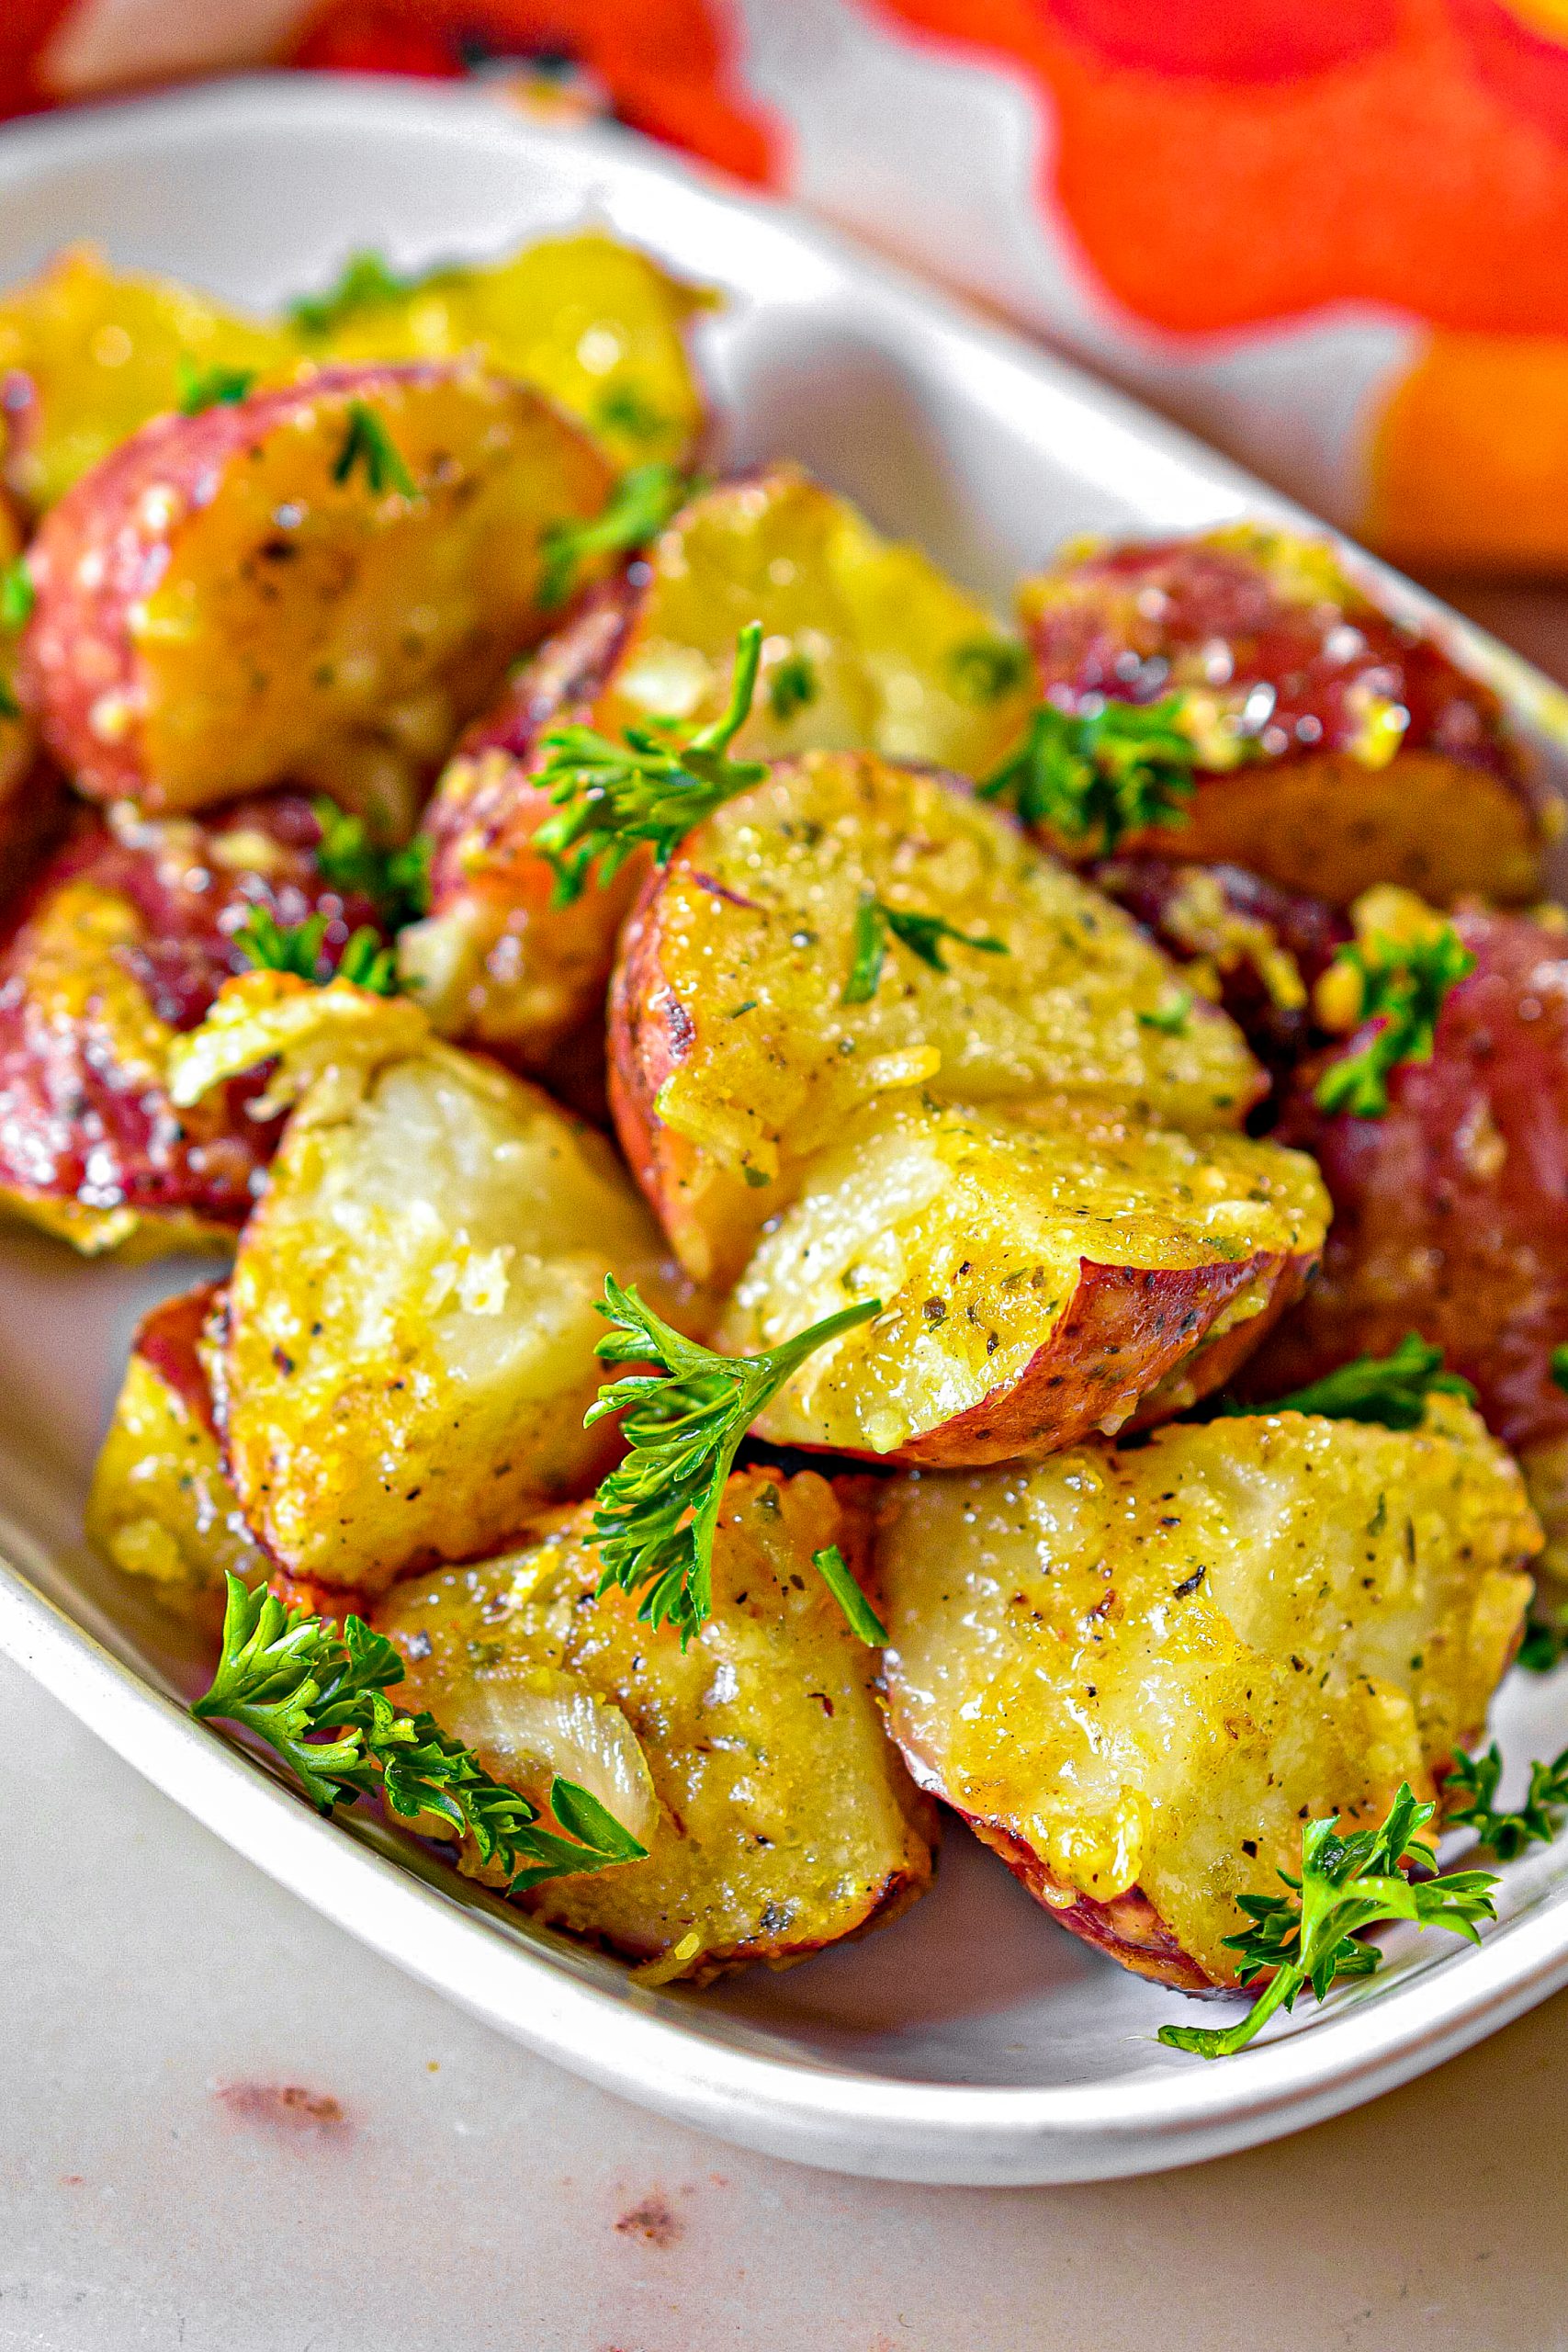 https://sweetpeaskitchen.com/wp-content/uploads/2023/05/Parmesan-Roasted-Red-Potatoes-3-scaled.jpg